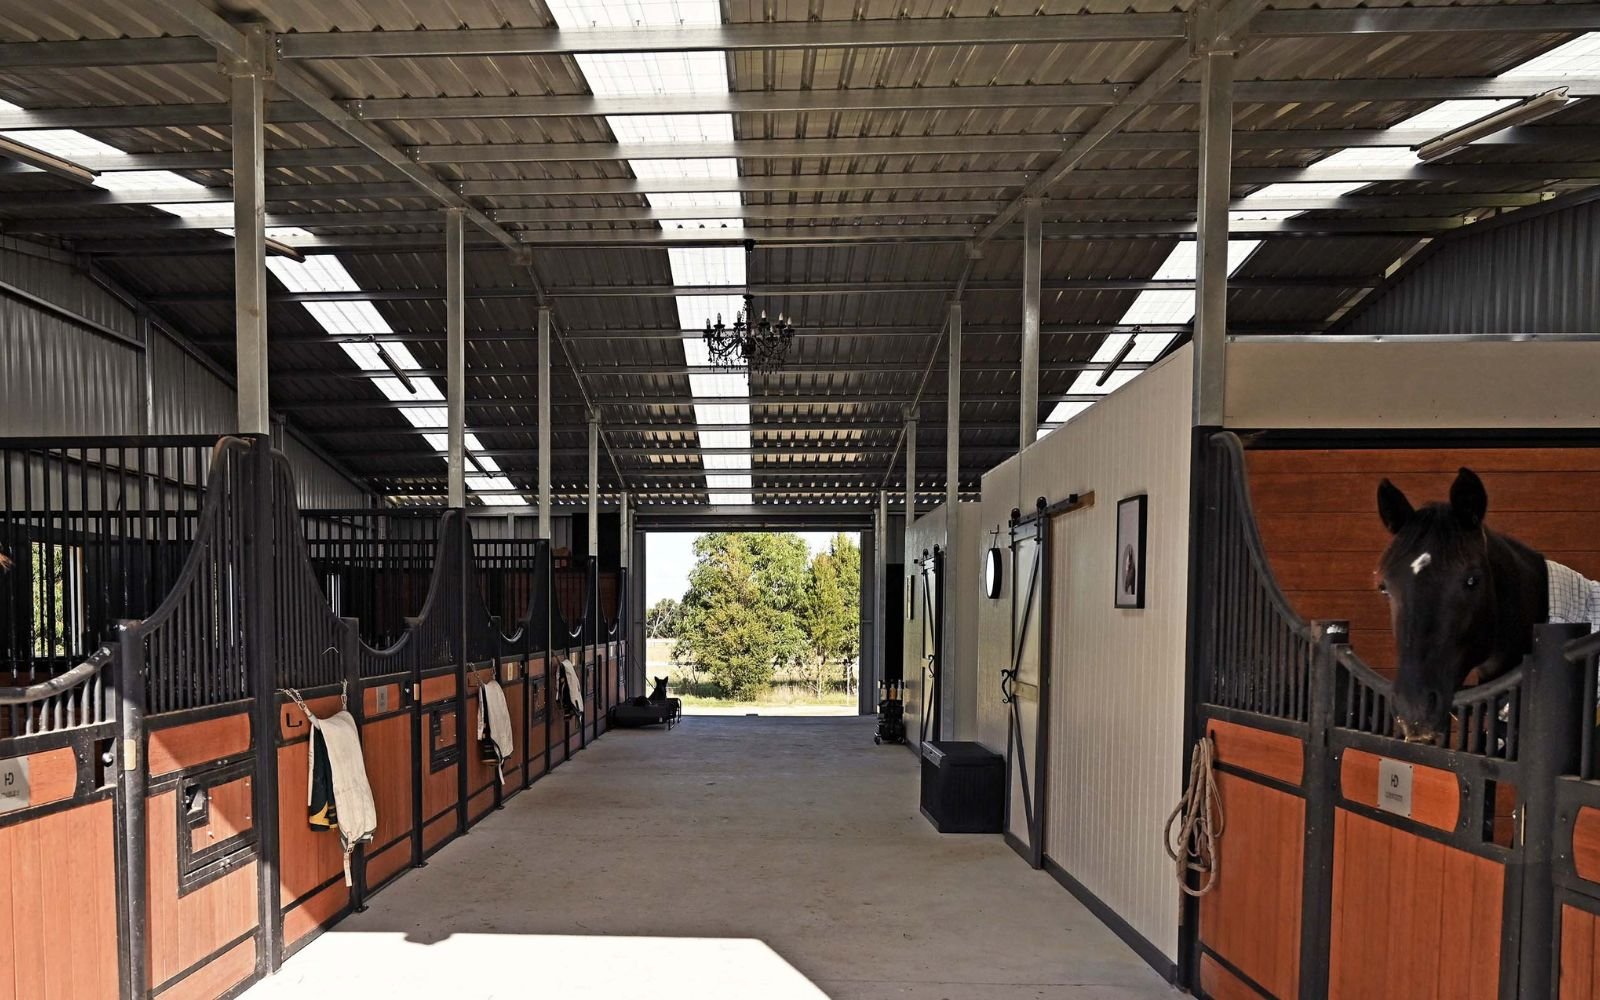 Labertouche combined indoor and stable complex